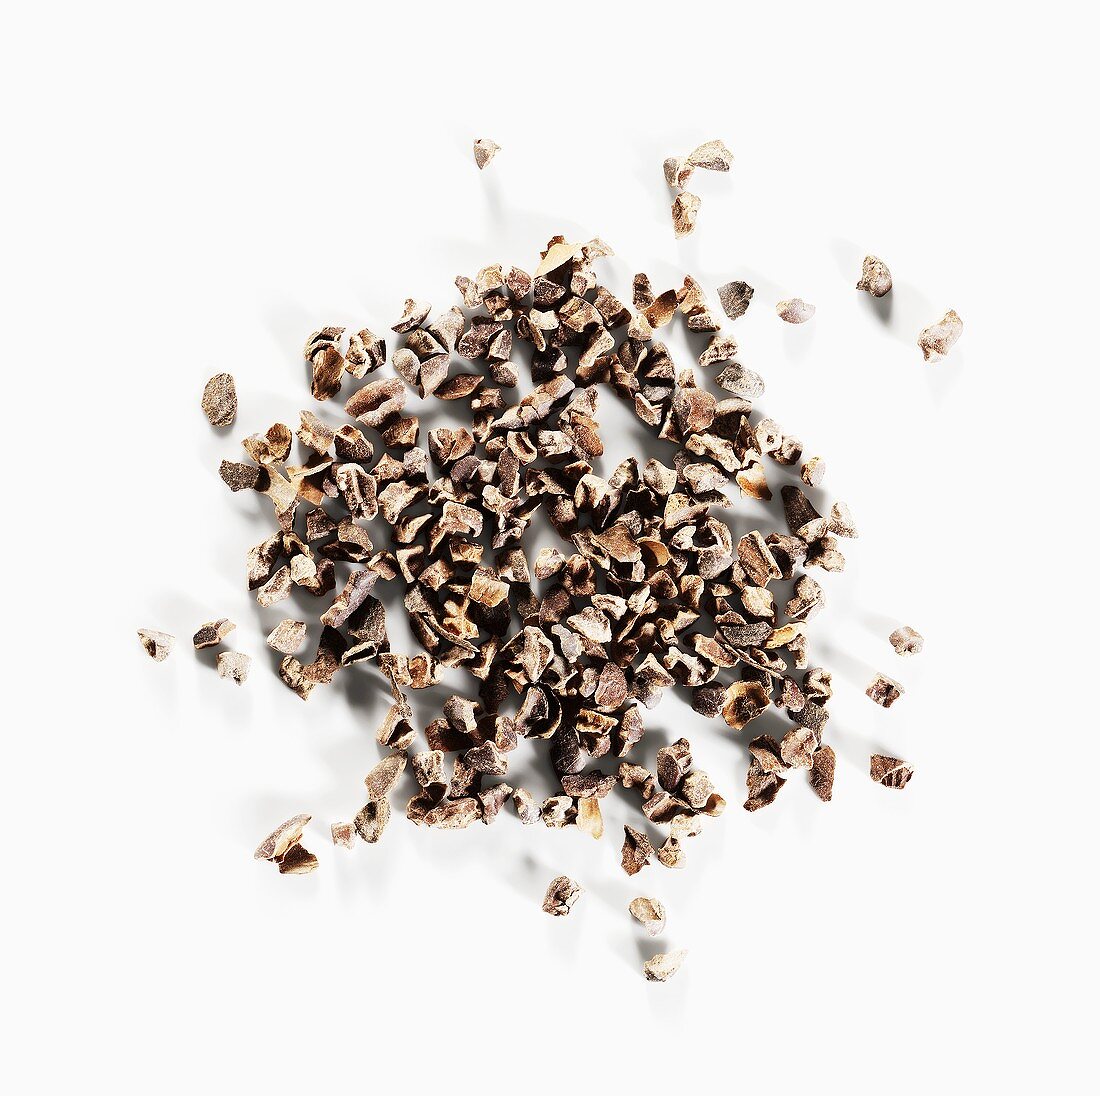 Cocoa nibs on a white surface